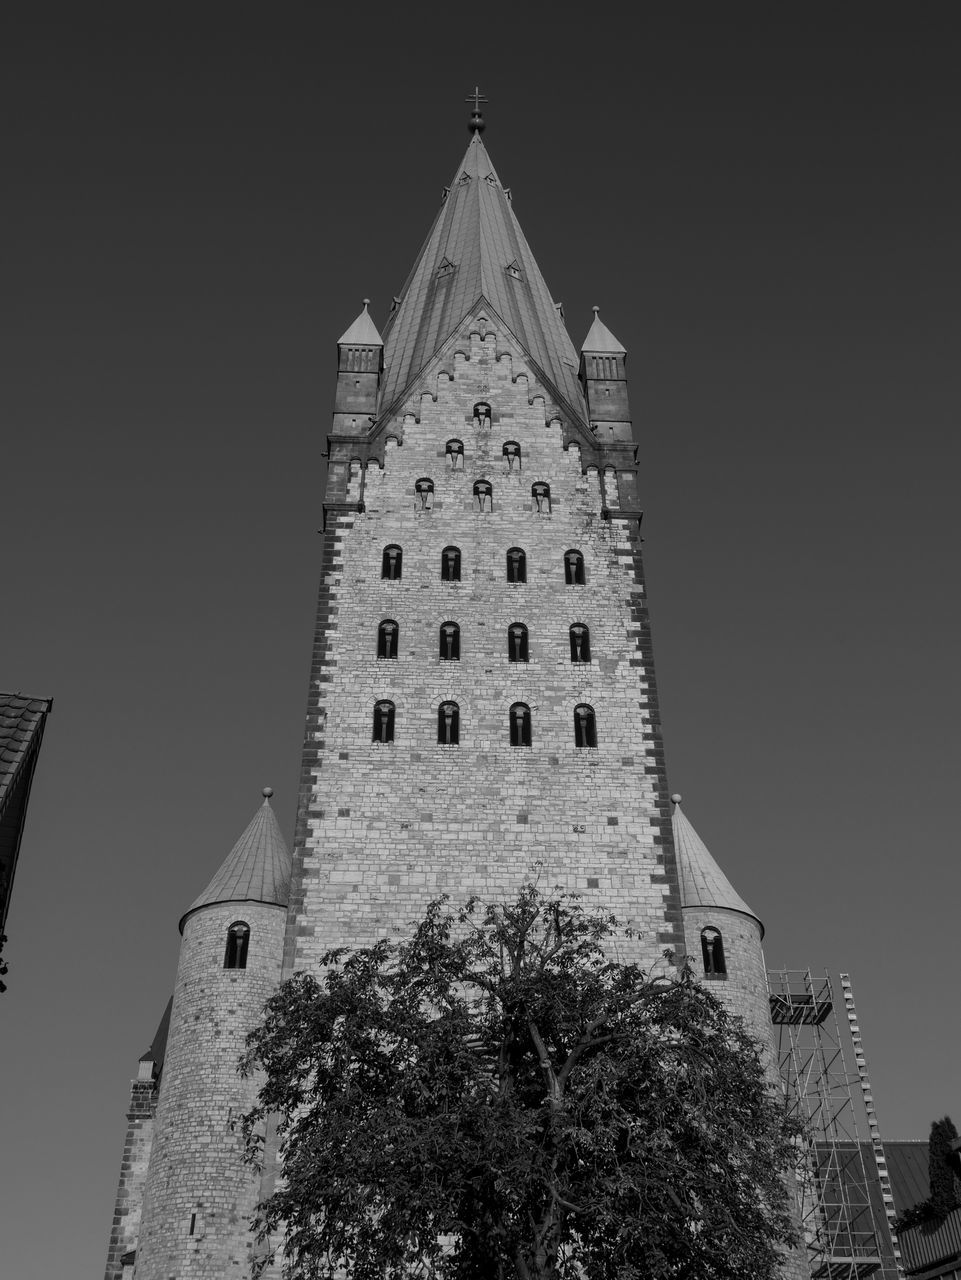 architecture, built structure, building exterior, building, black and white, tower, low angle view, sky, tree, monochrome photography, monochrome, history, nature, the past, no people, steeple, travel destinations, place of worship, landmark, clear sky, religion, plant, spire, belief, city, clock, outdoors, white, travel, day, spirituality, time